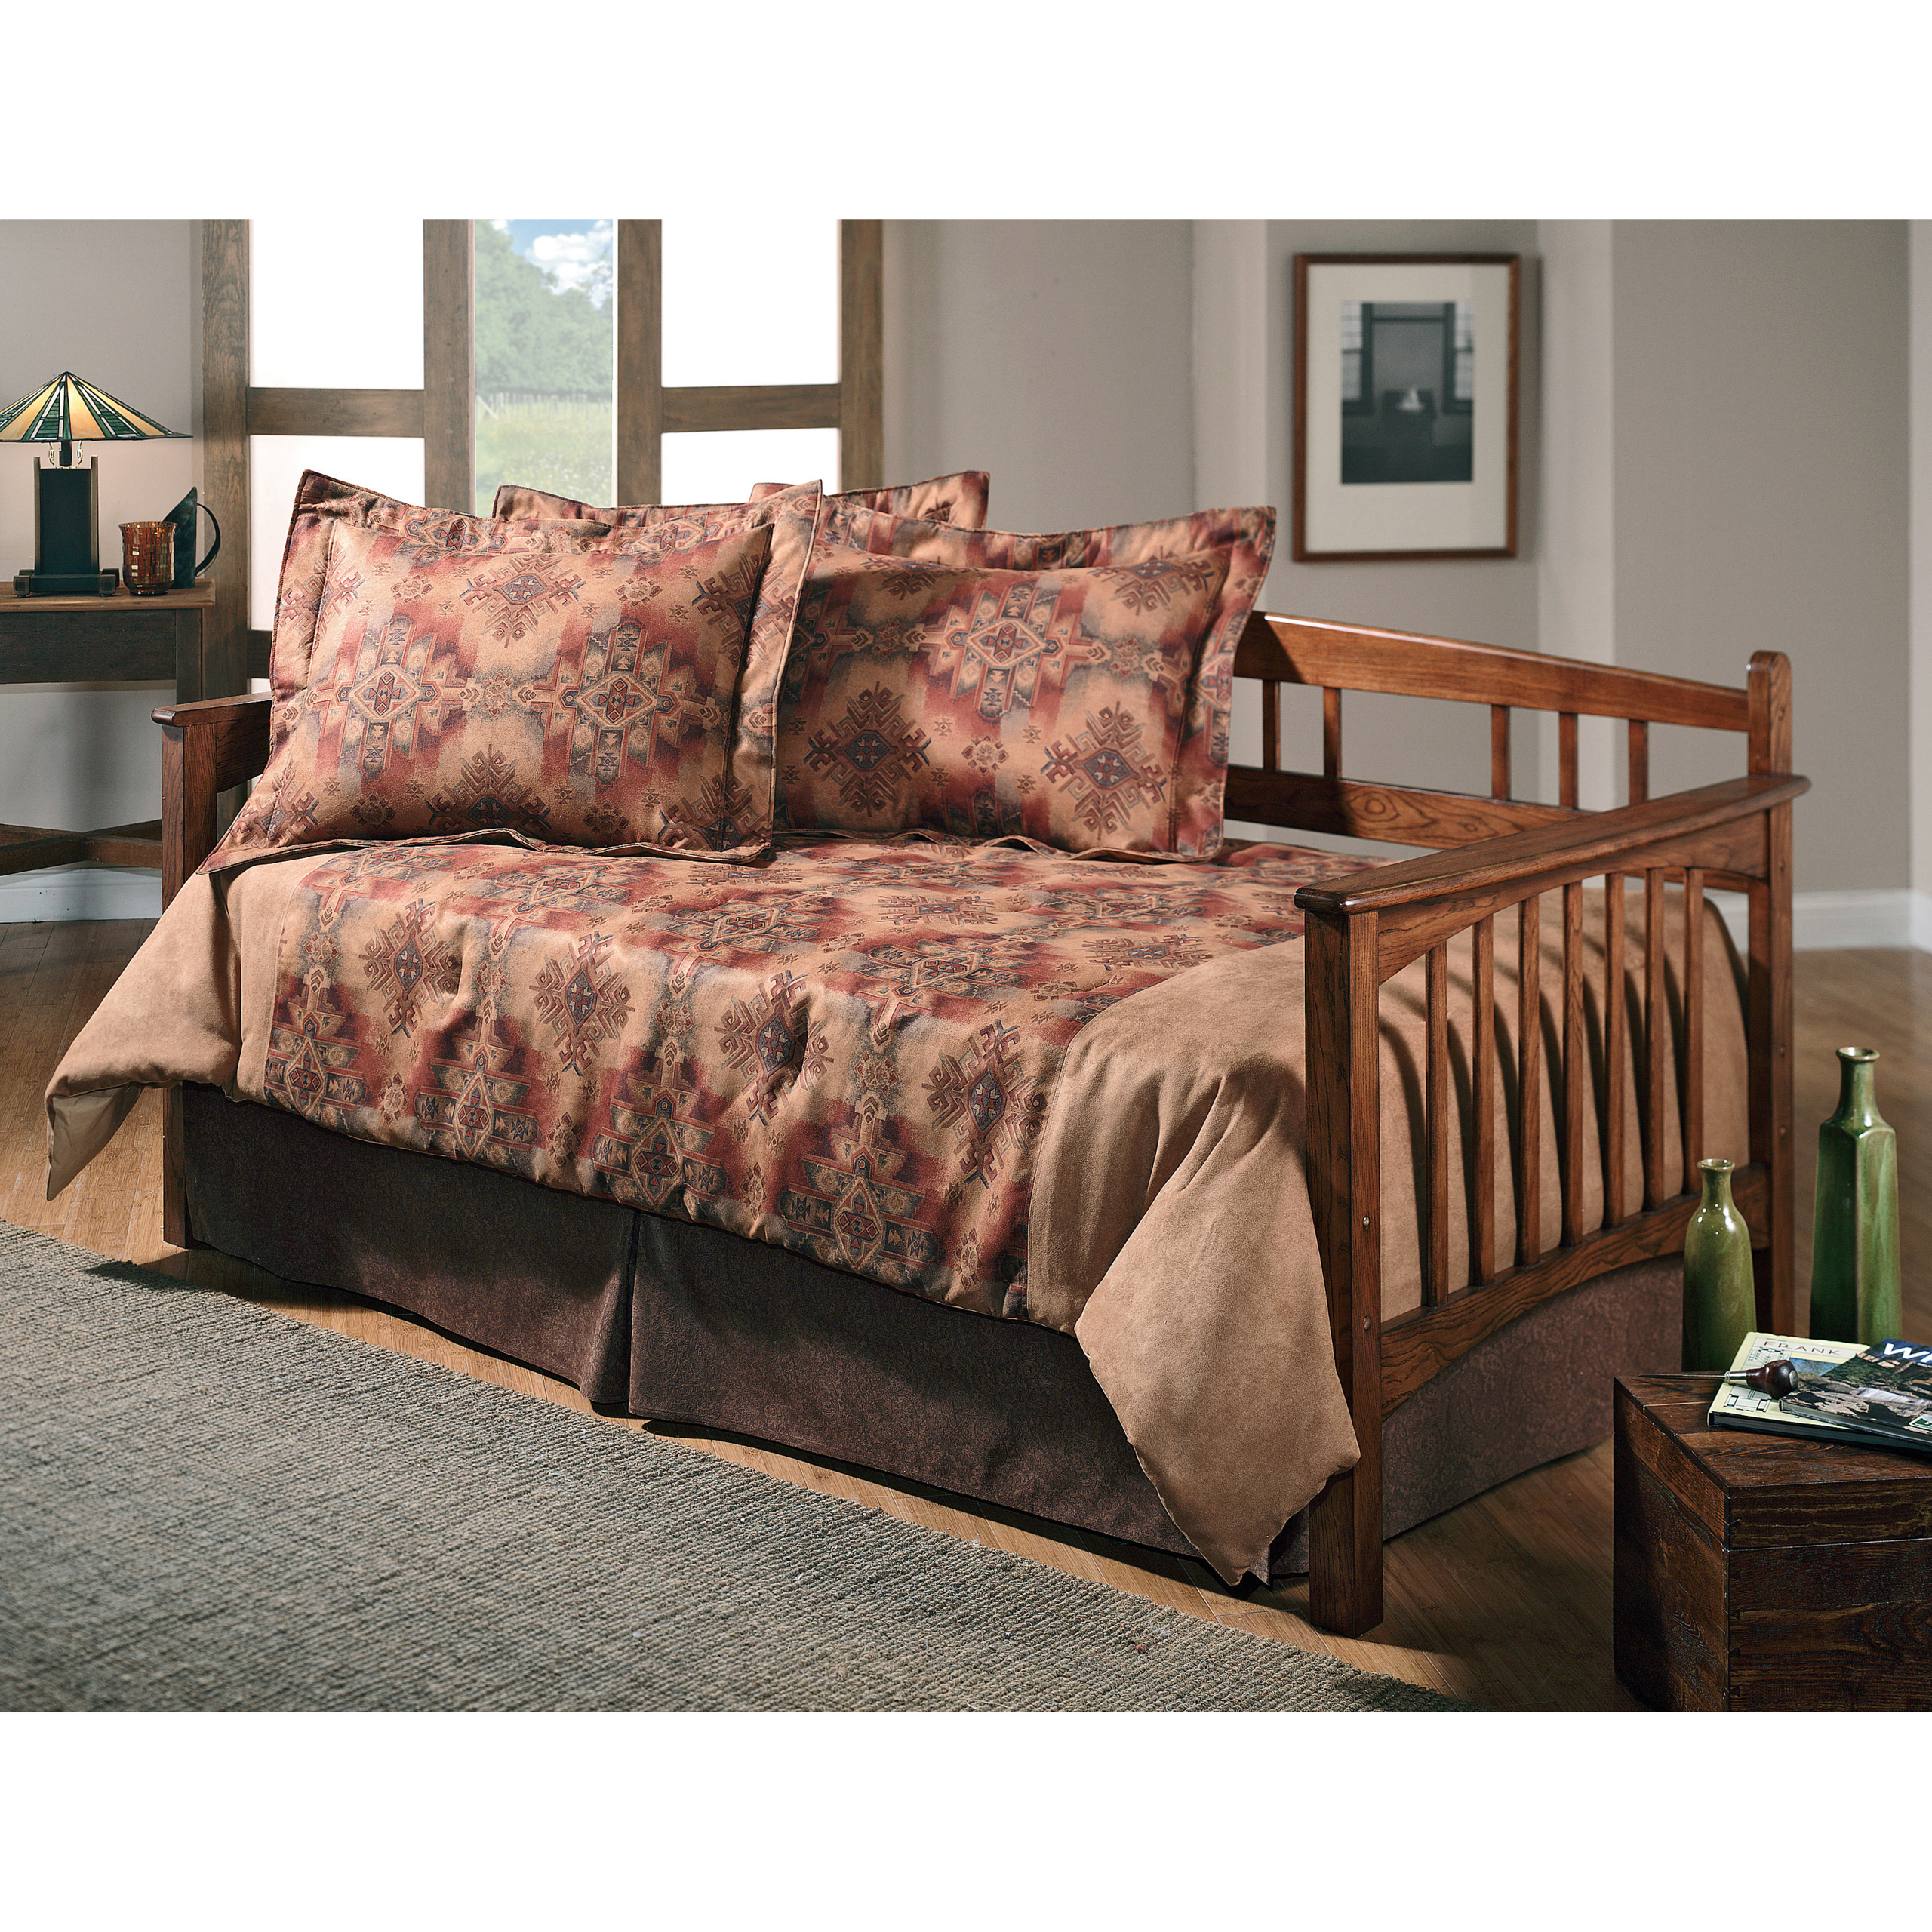 Hillsdale furniture presents the mission style daybed made from solid